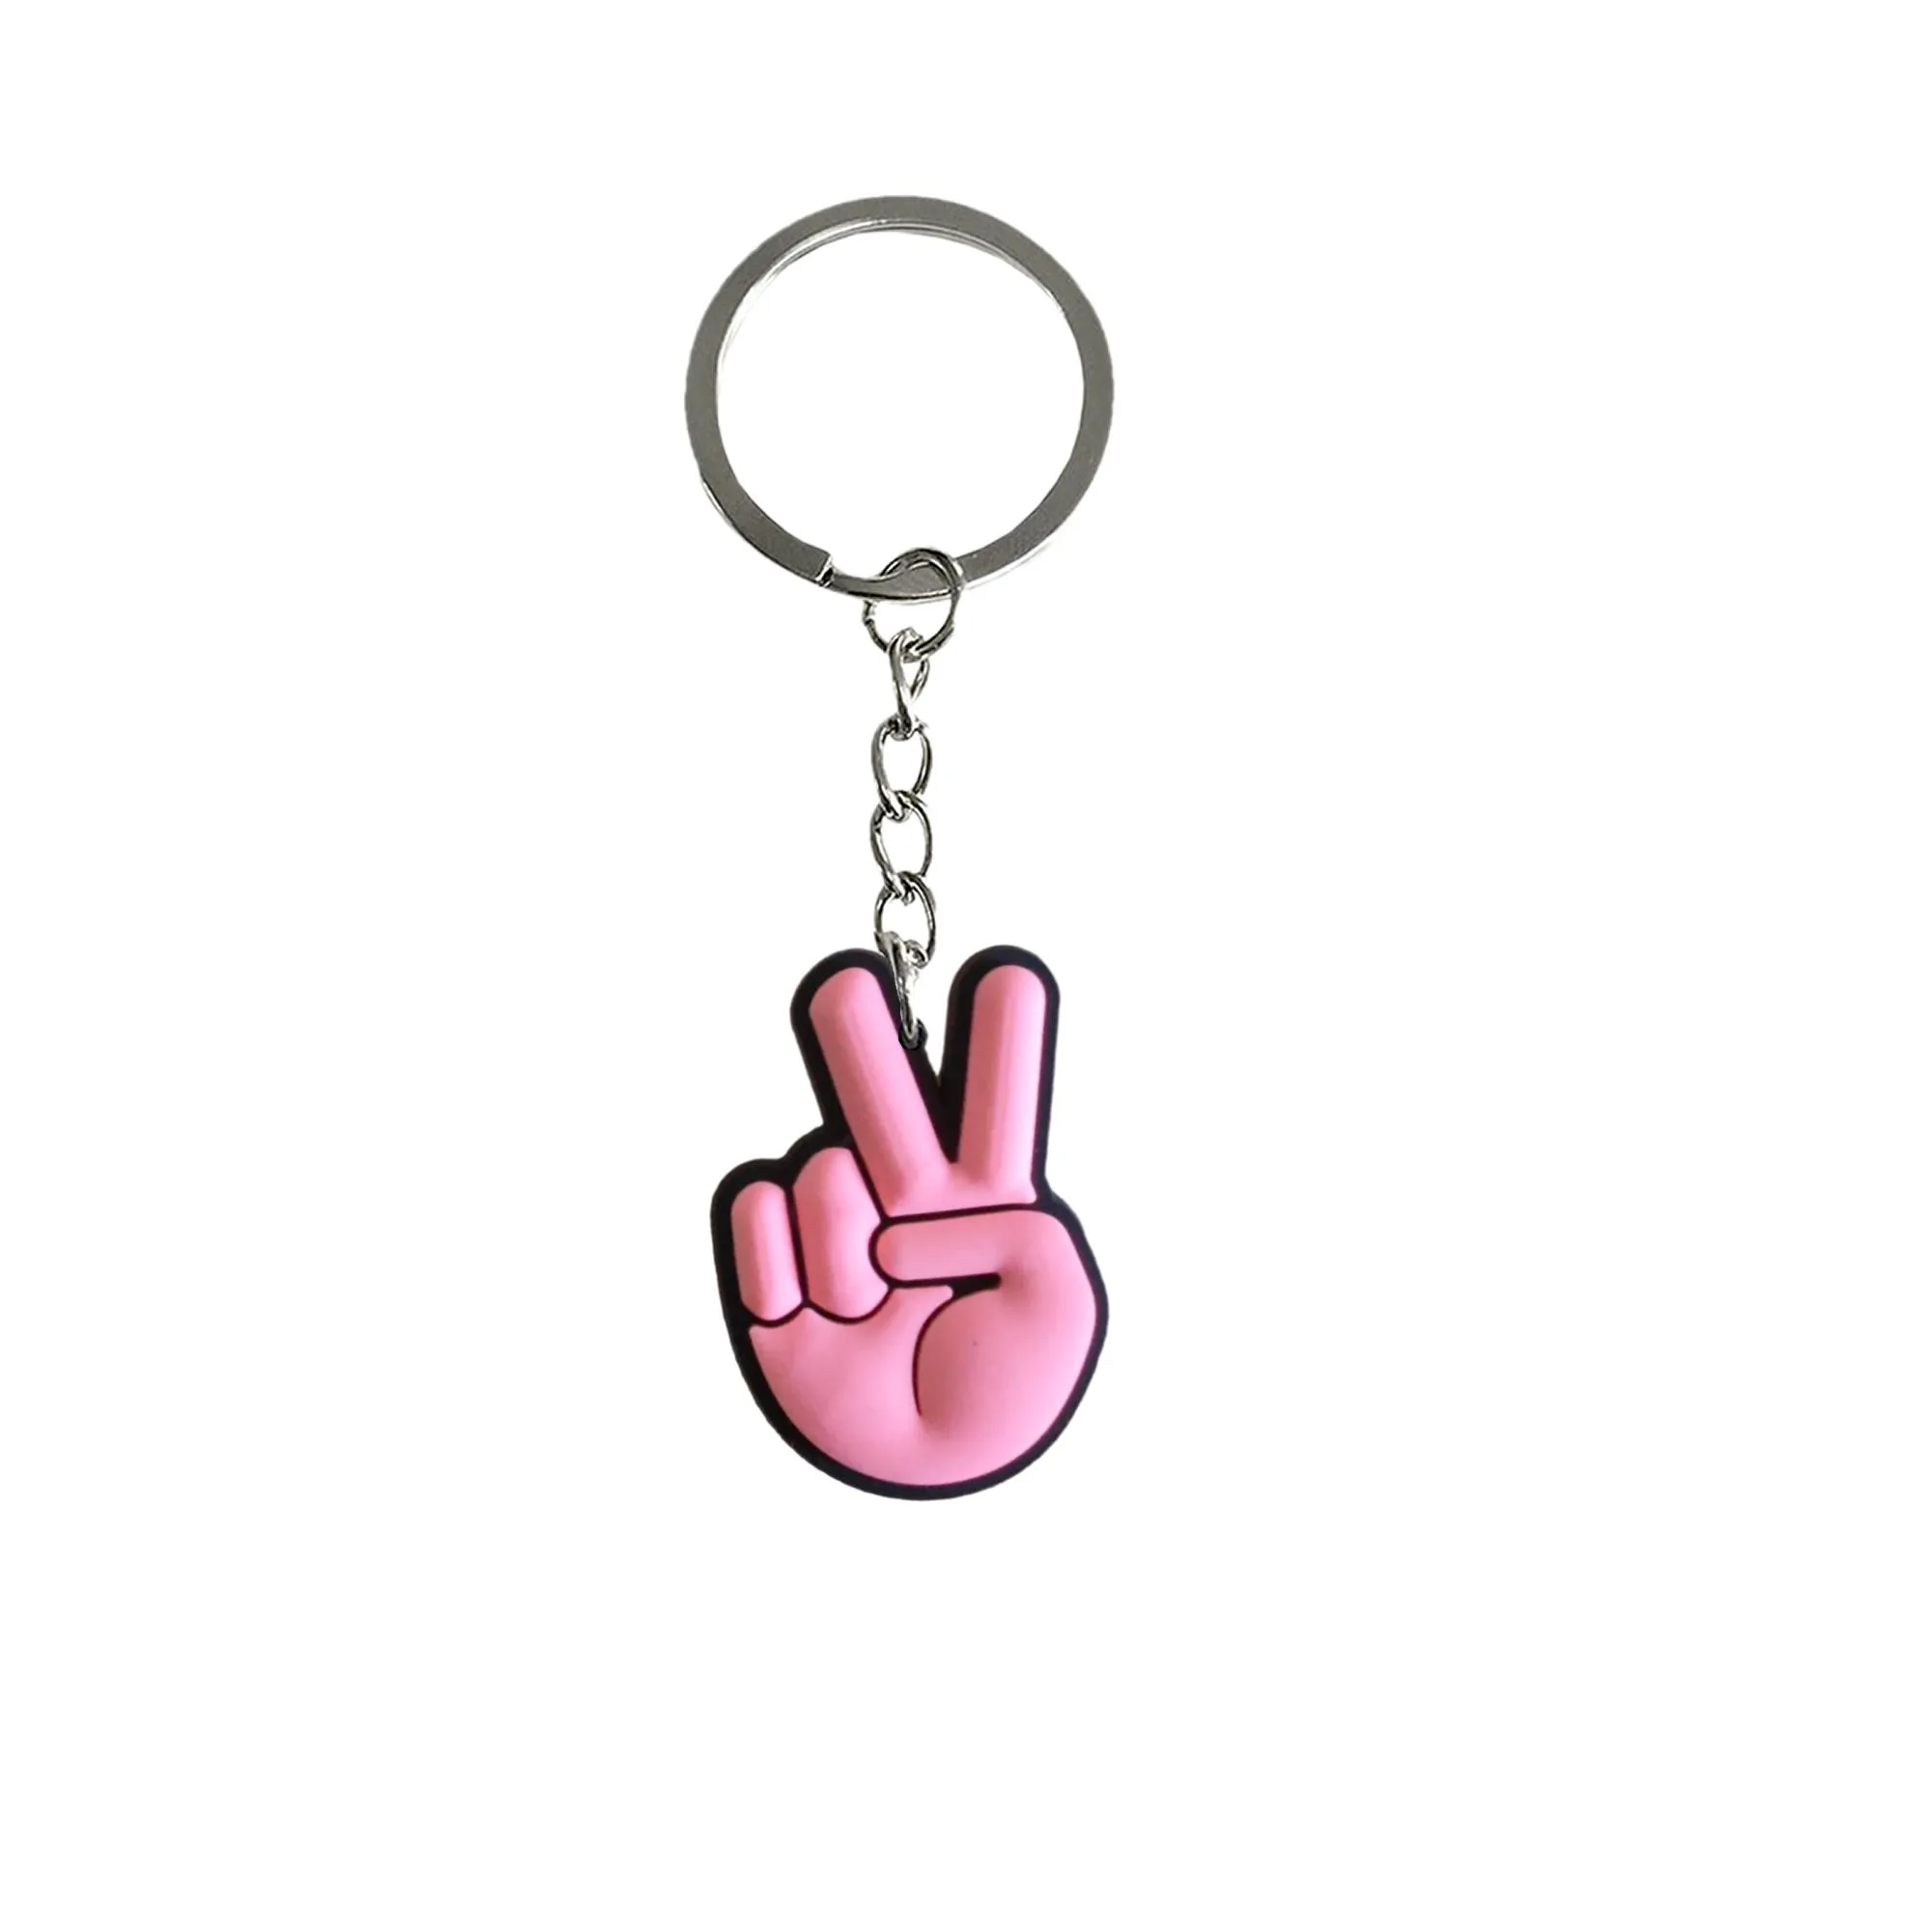 theme of peace 2 16 keychain keyrings for bags birthday christmas party favors gift kids keyring suitable schoolbag car bag key pendant accessories ring girls